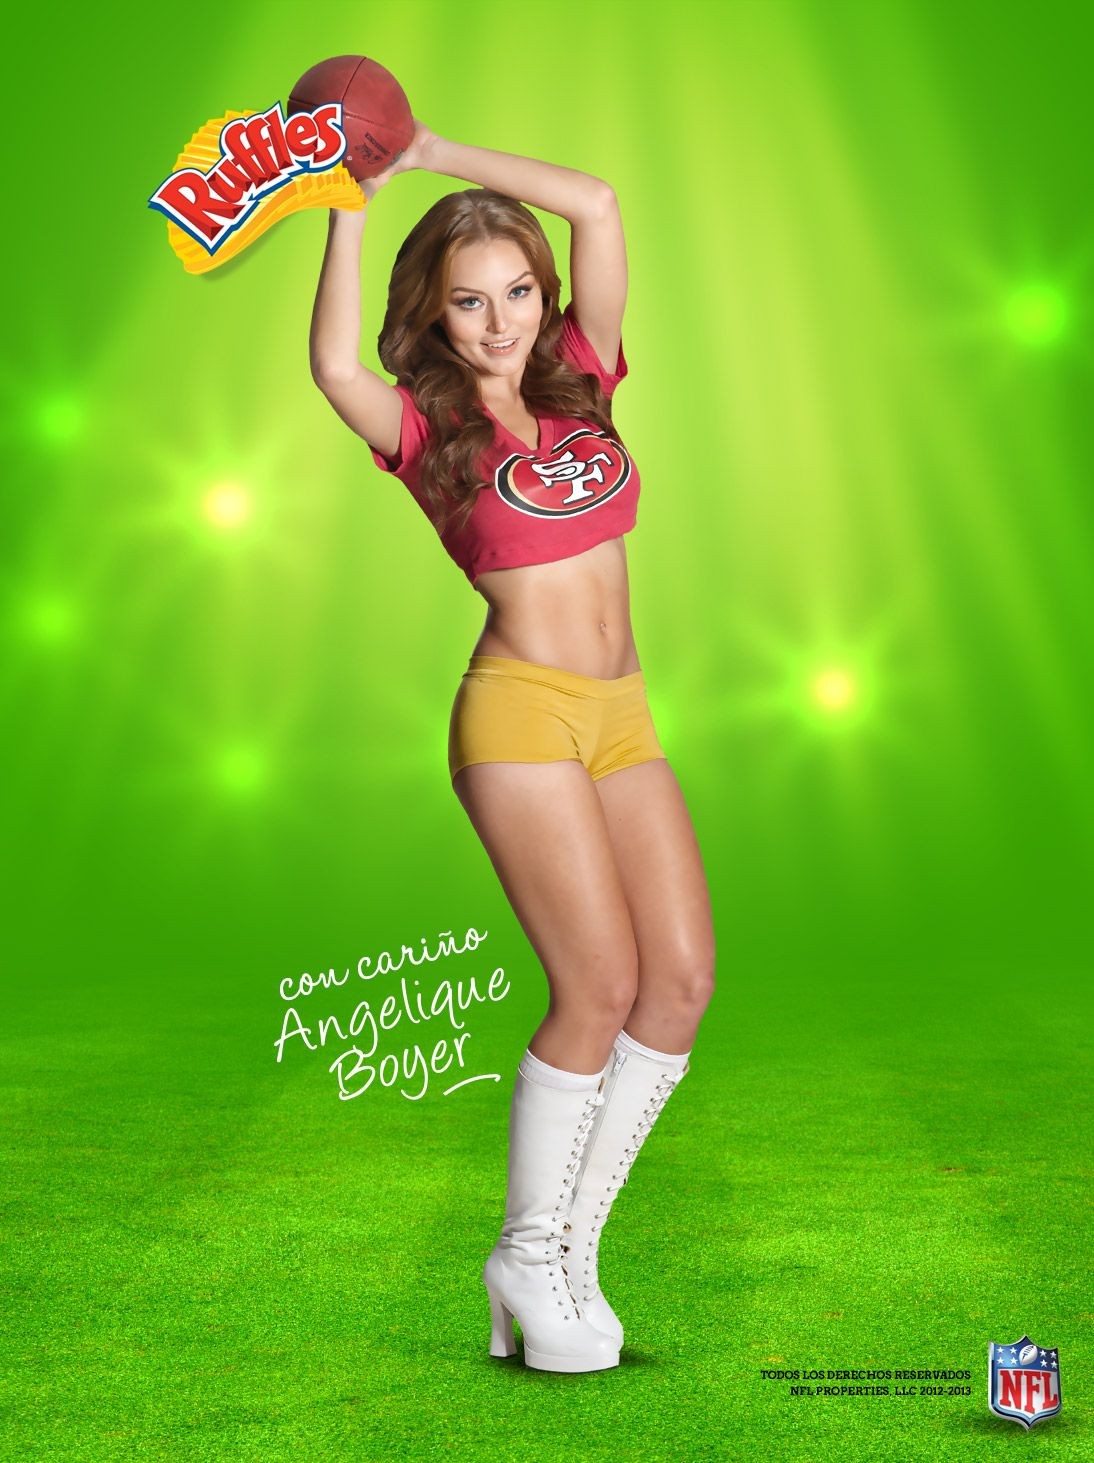 Angelique Boyer trägt sexy Trikot Look-alike Outfits in nfl Promos
 #75243026